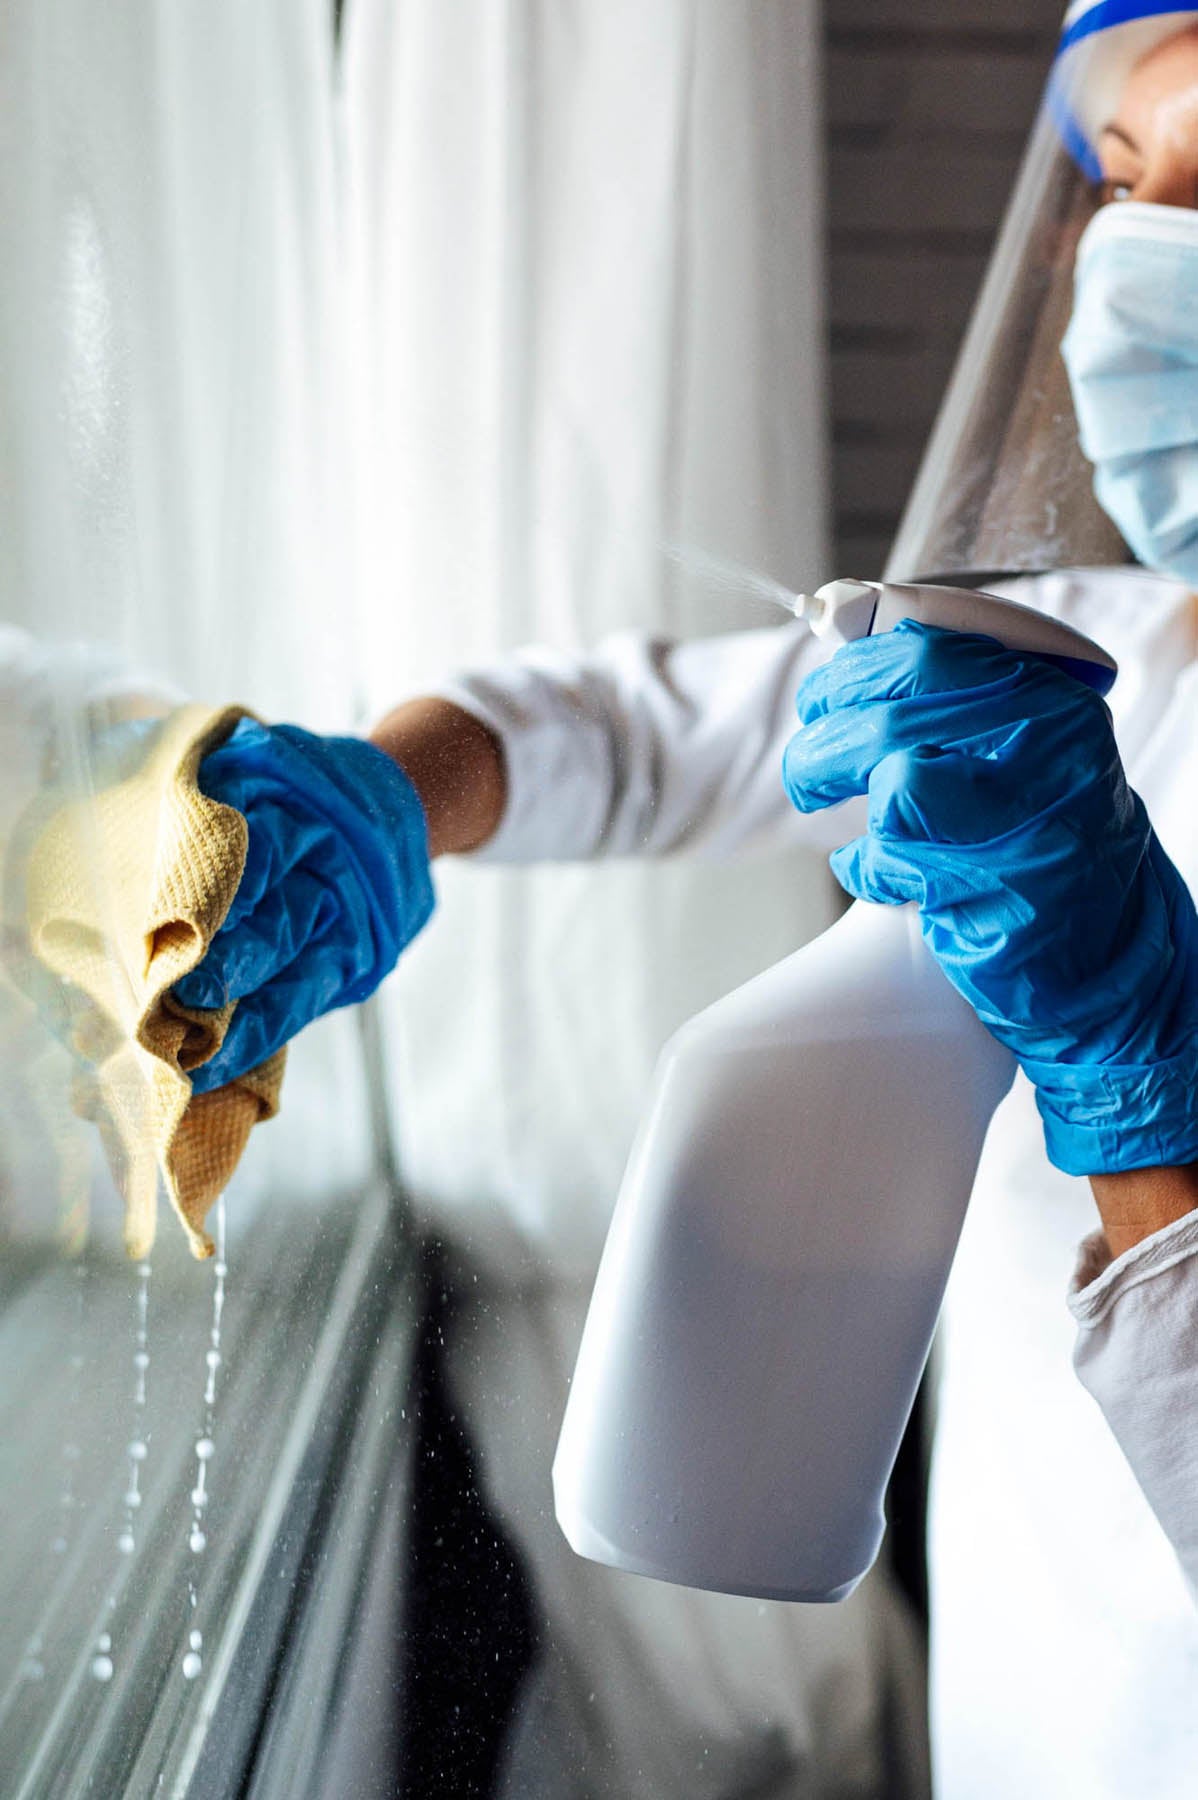 Cleaning staff disinfecting surfaces whilst wearing ppe